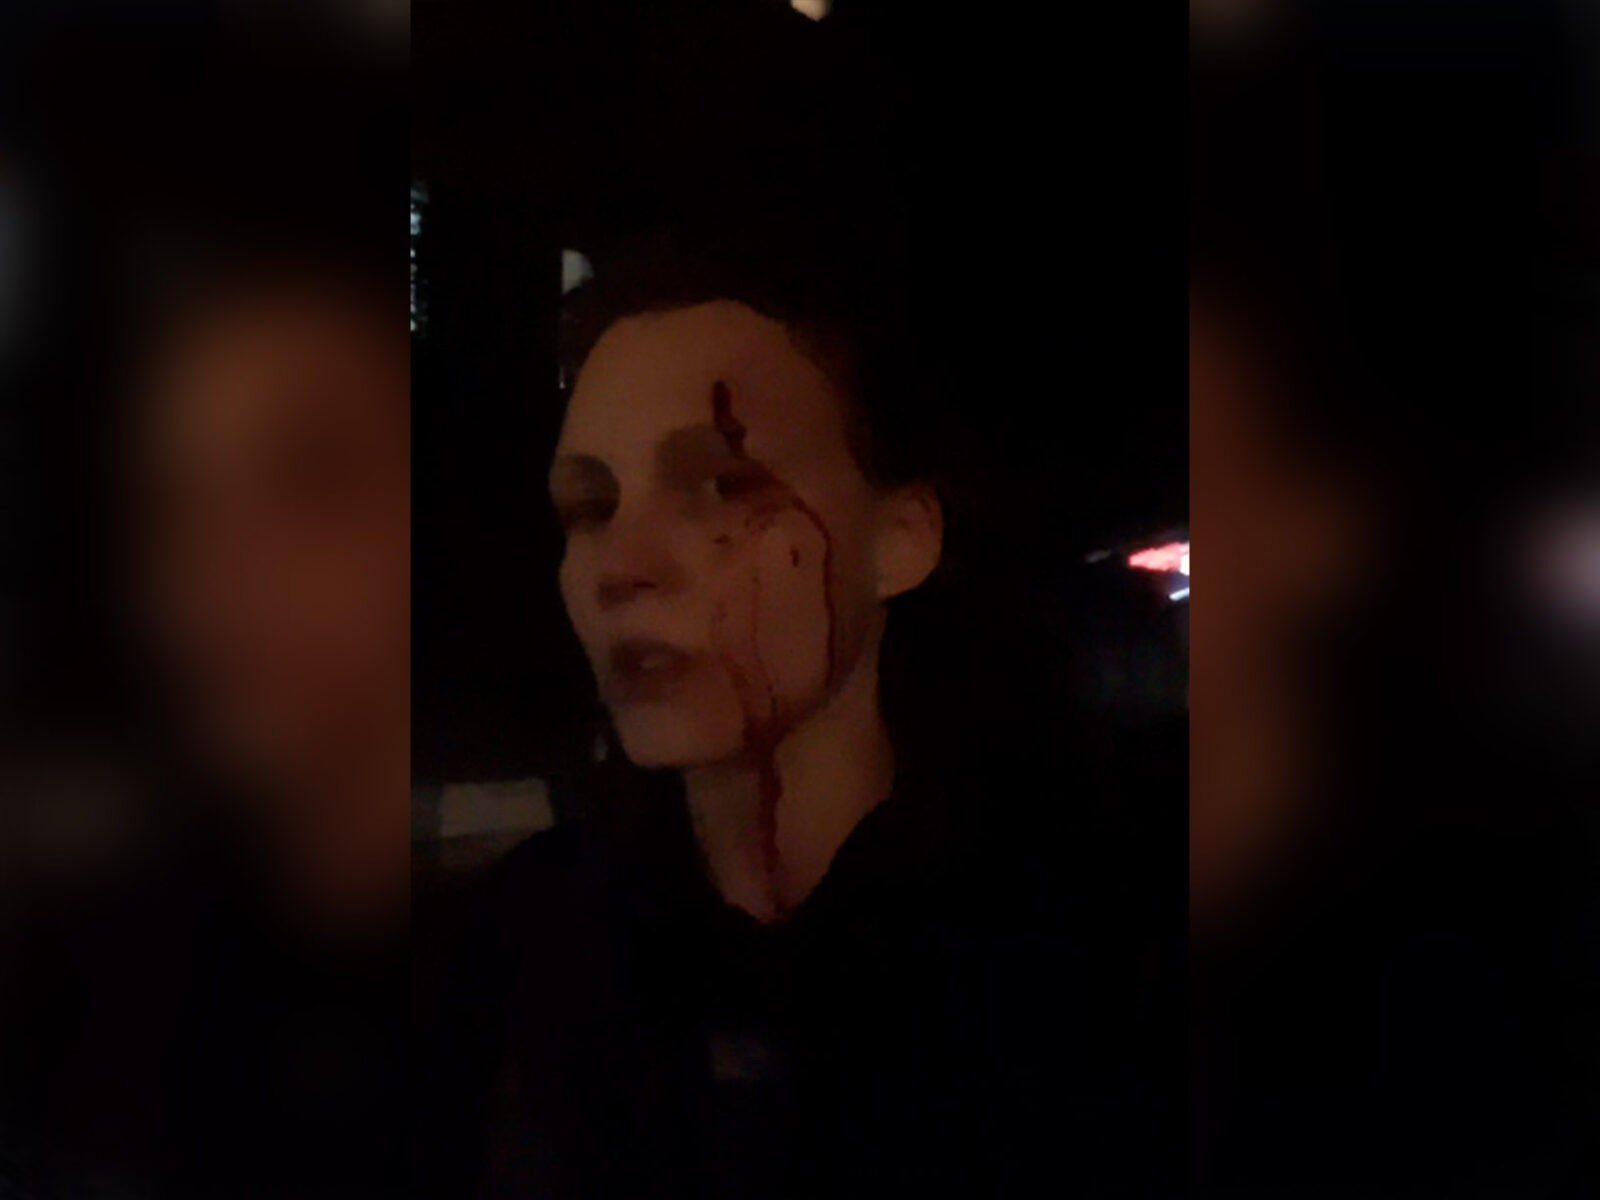 A girl was beaten in Moscow